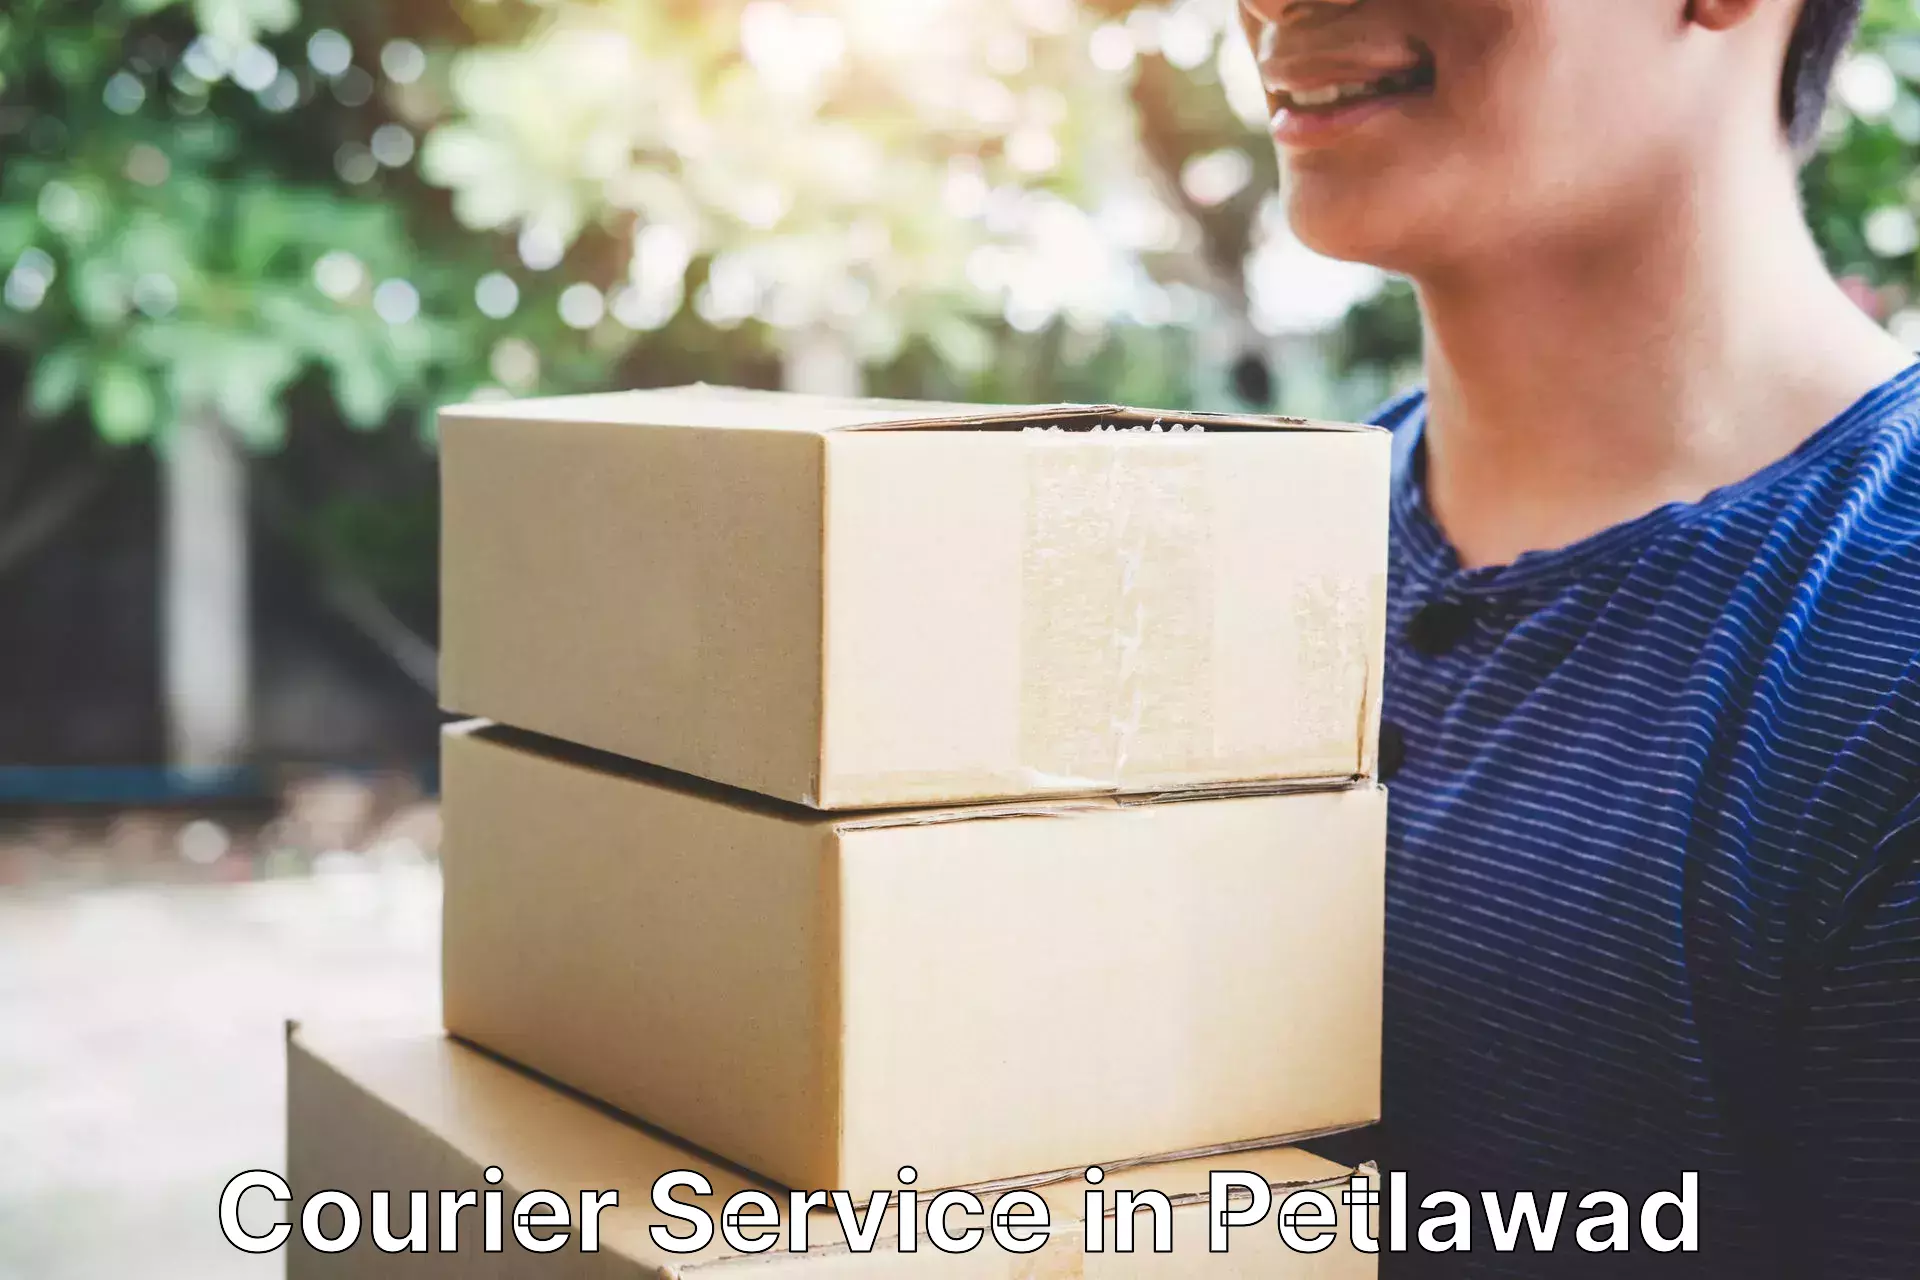 24-hour delivery options in Petlawad